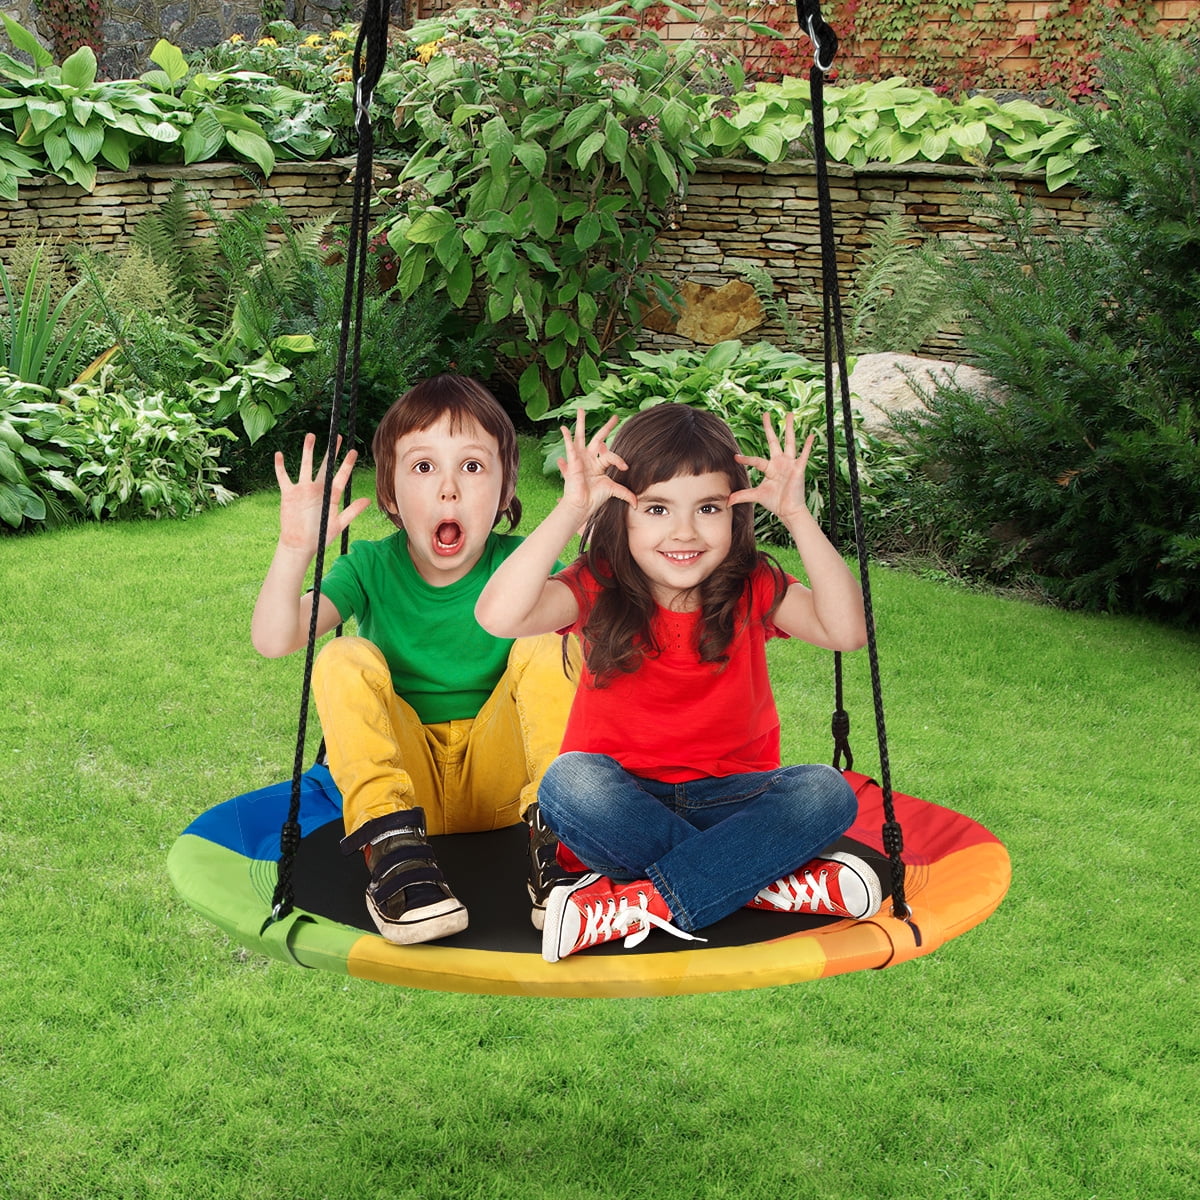 Goplus 40'' Flying Saucer Tree Swing Indoor Outdoor Play Set Swing for Kids colorful - 1